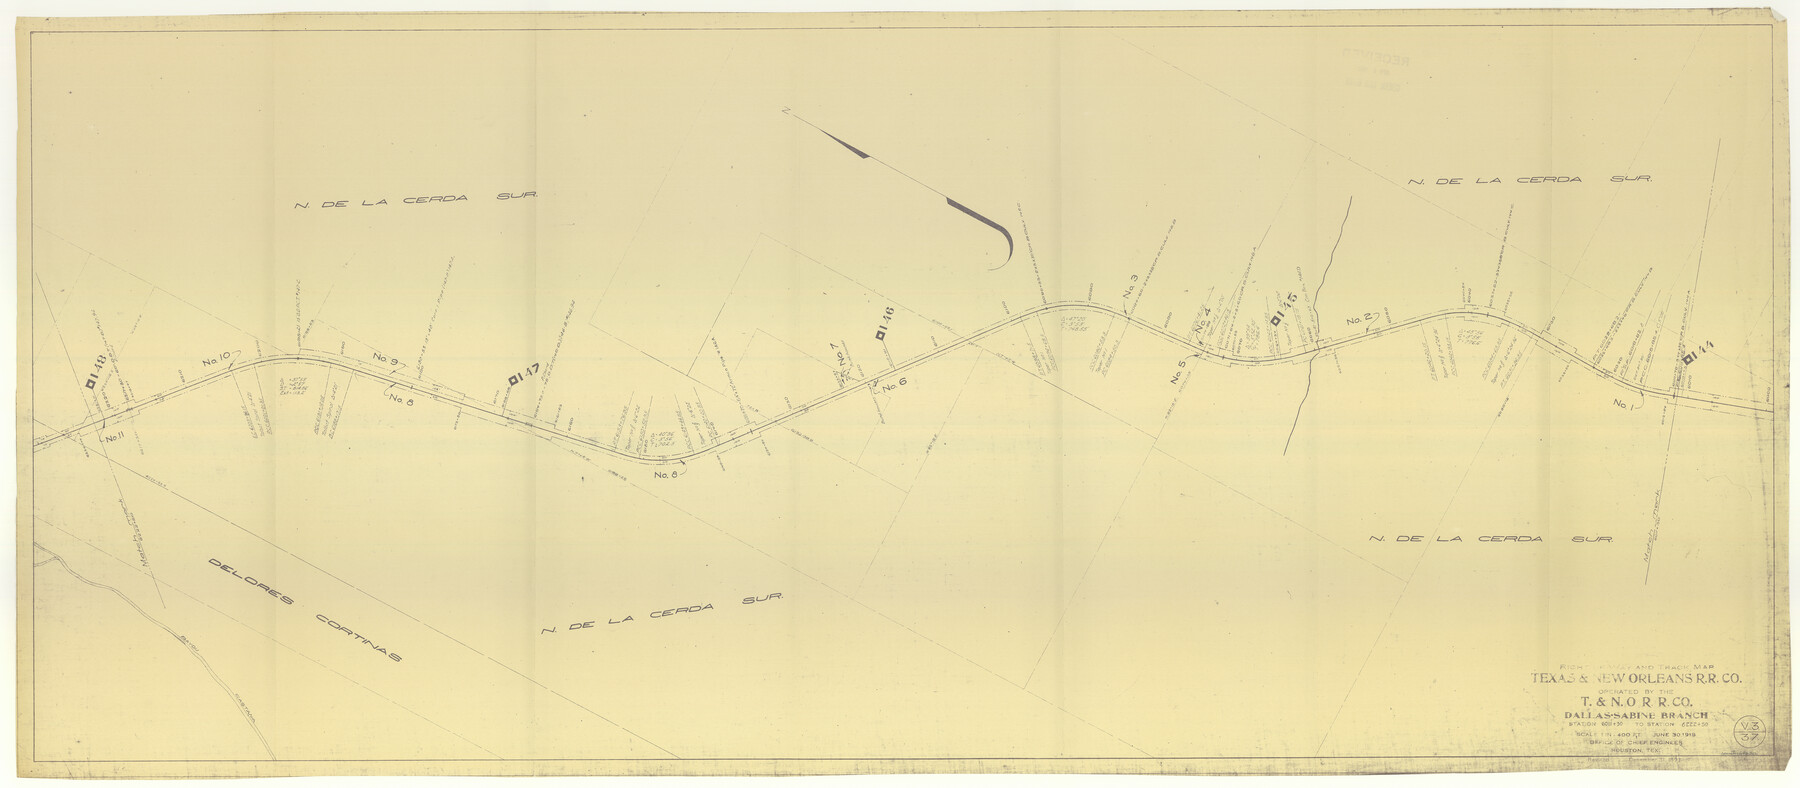 64630, Right of Way and Track Map, Texas & New Orleans R.R. Co. operated by the T. & N. O. R.R. Co., Dallas-Sabine Branch, General Map Collection